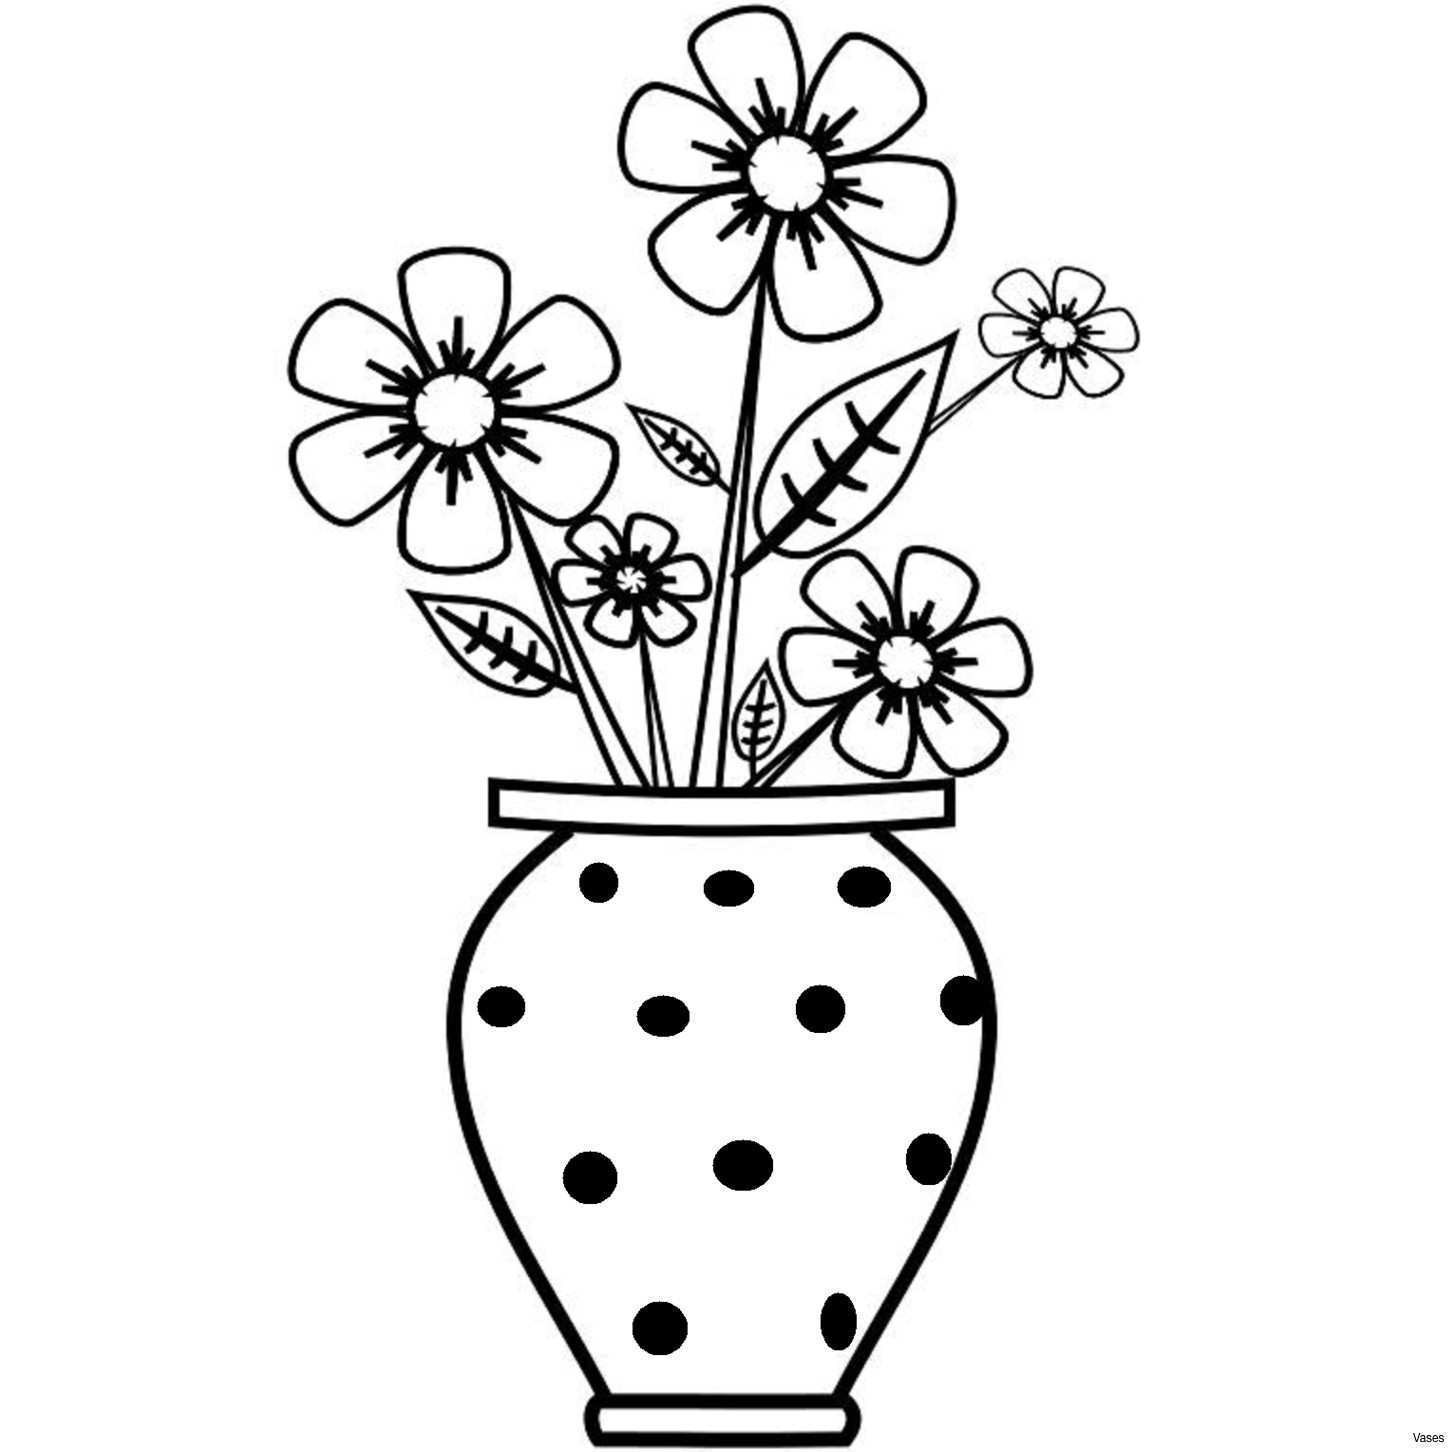 18 Popular Flowers for Vase 2024 free download flowers for vase of black and white art inspirational will clipart colored flower vase pertaining to black and white art inspirational will clipart colored flower vase clip arth vases art in